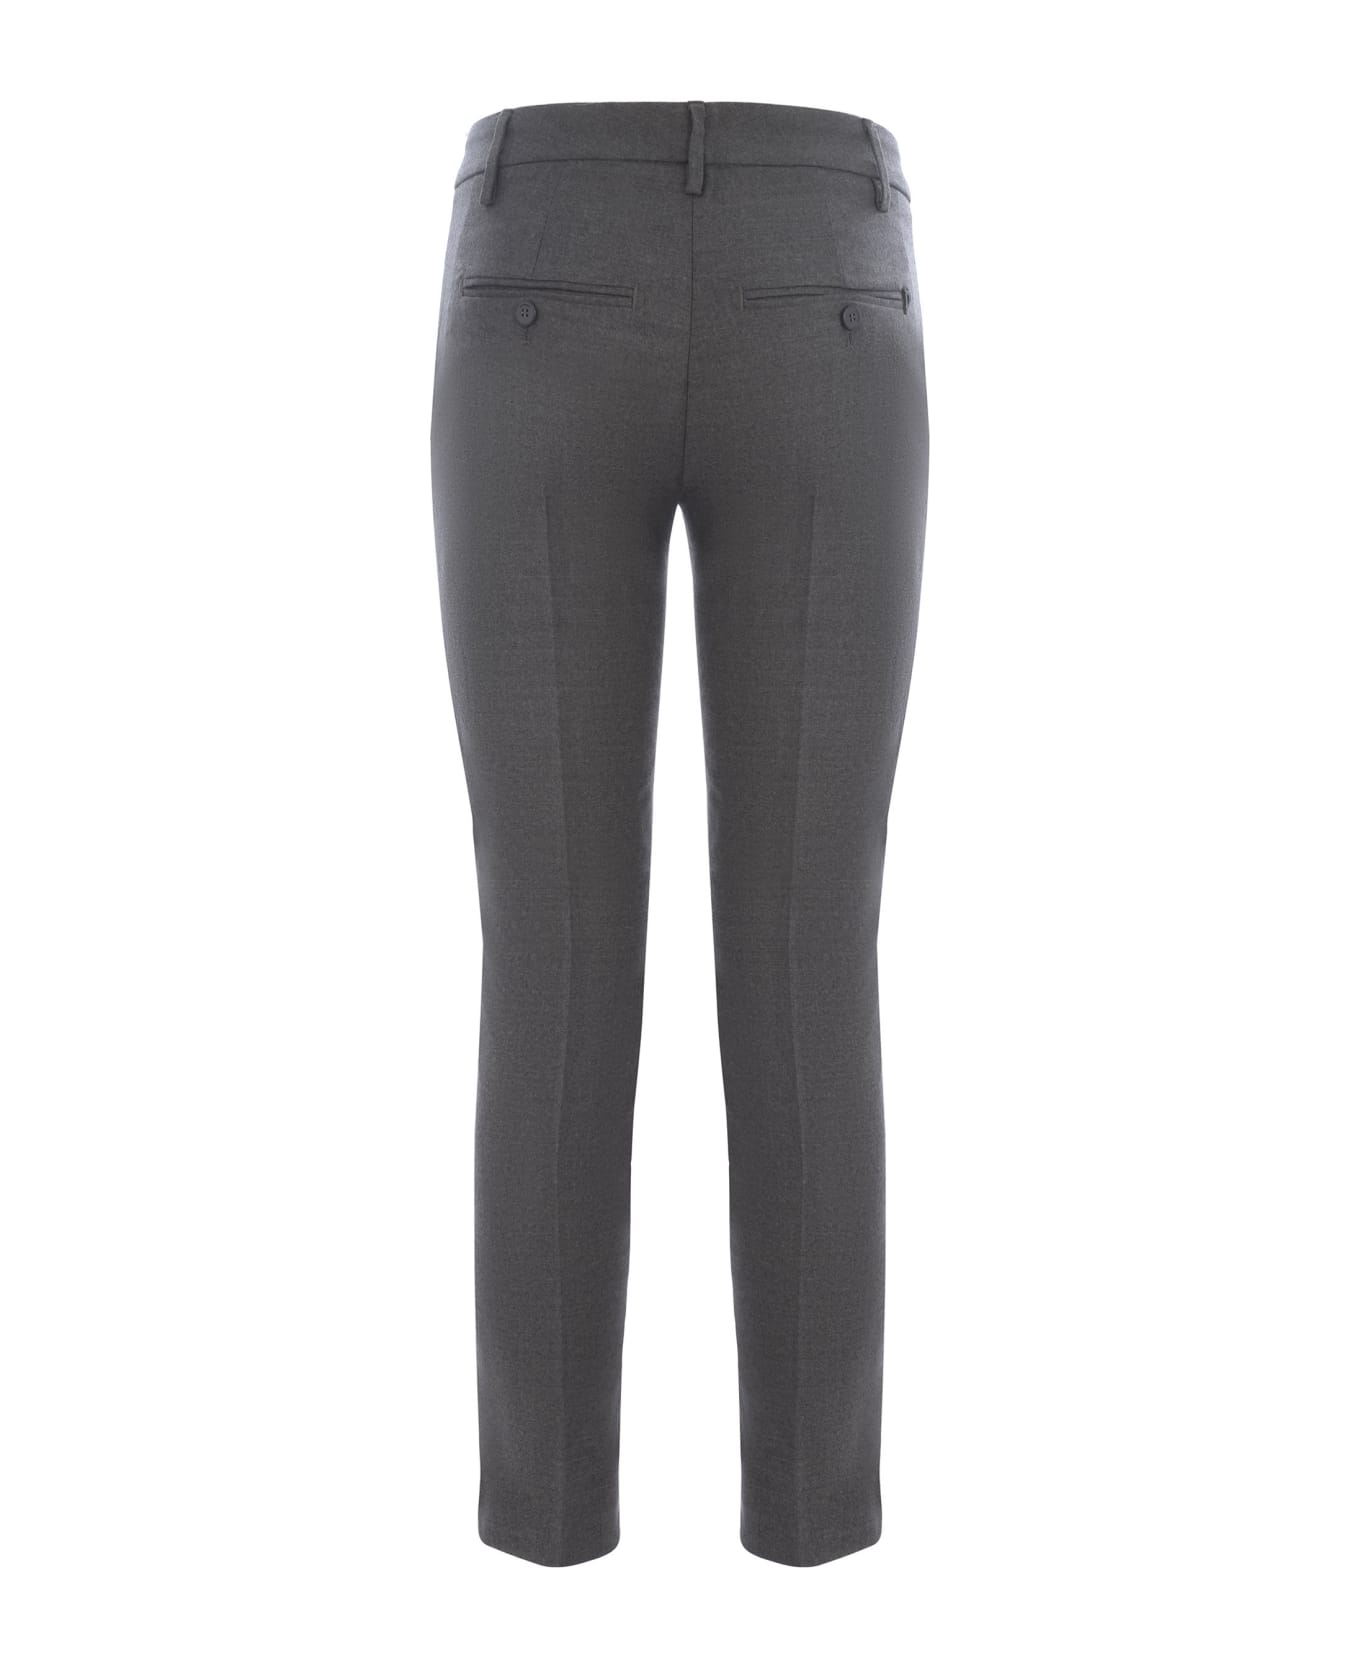 Dondup Trousers Dondup "perfect" In Virgin Wool - Grigio antracite